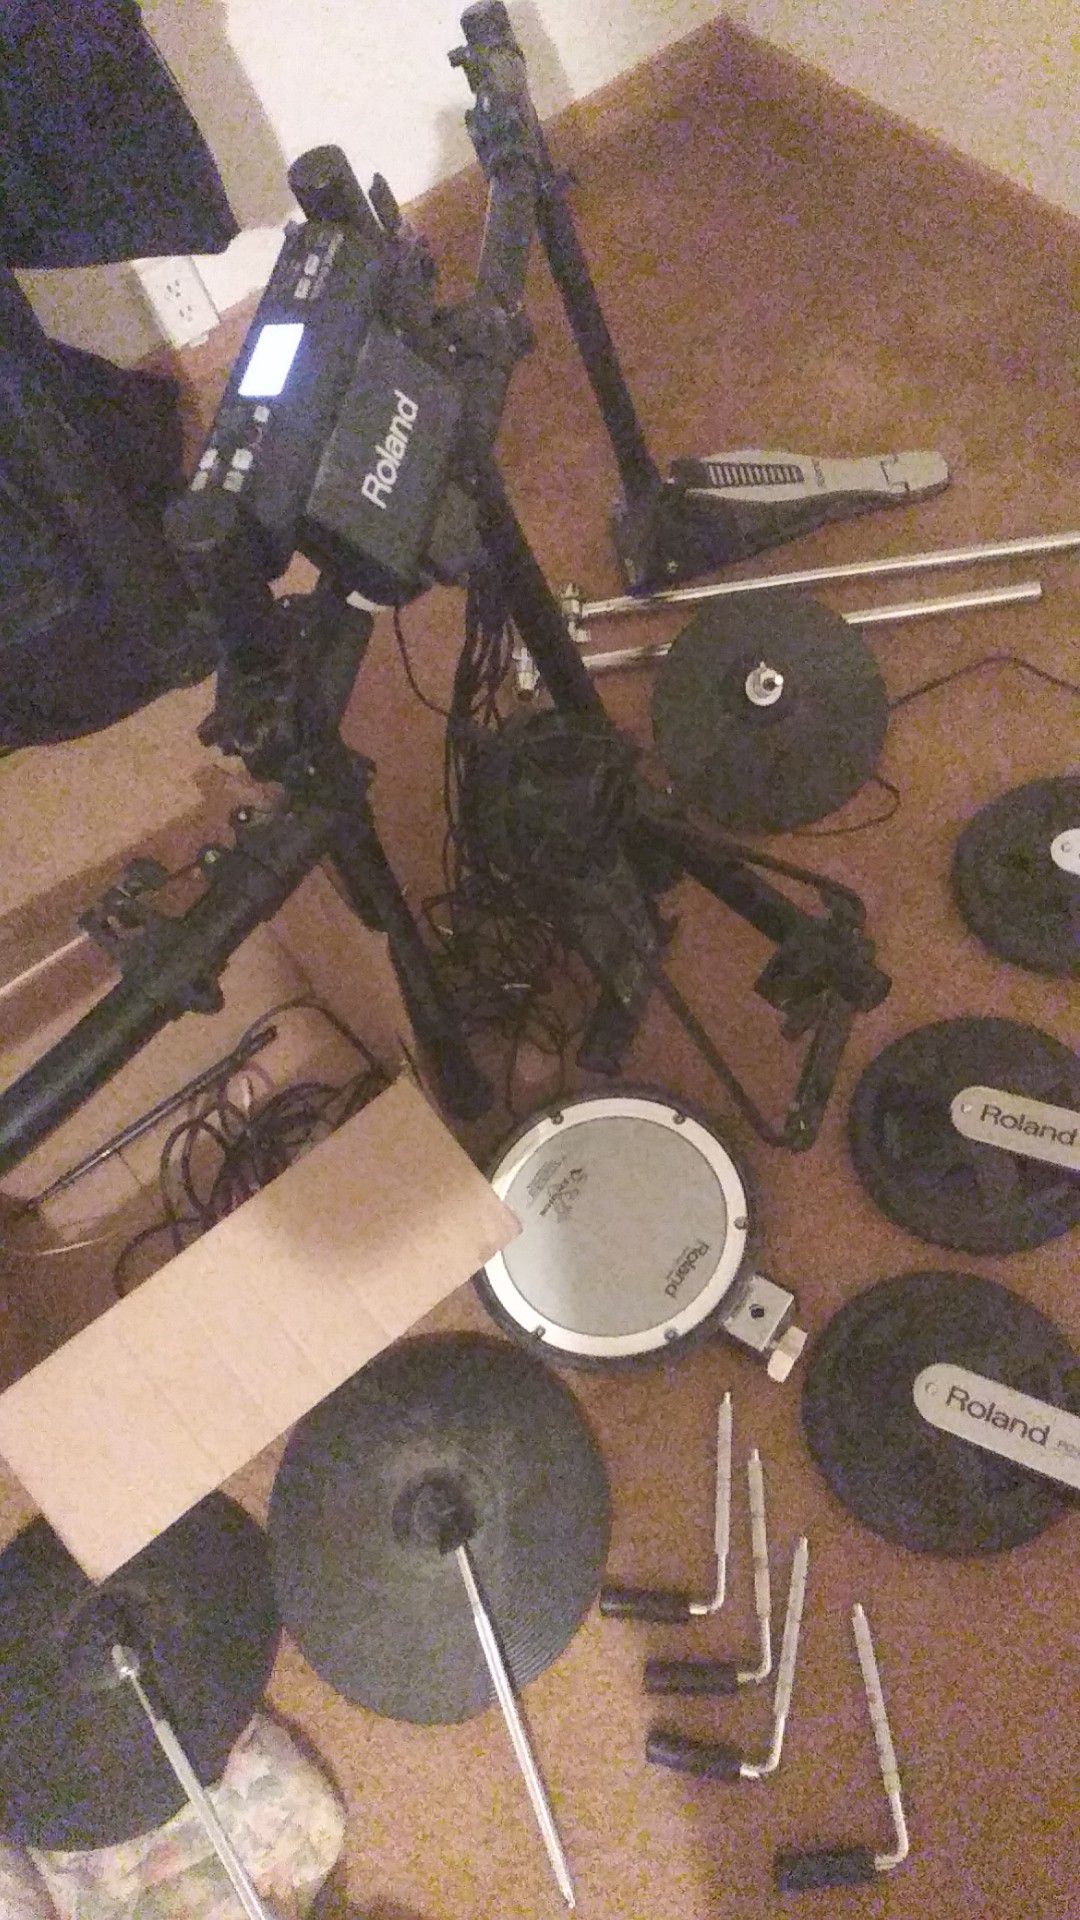 Roland electronic drum set only $250